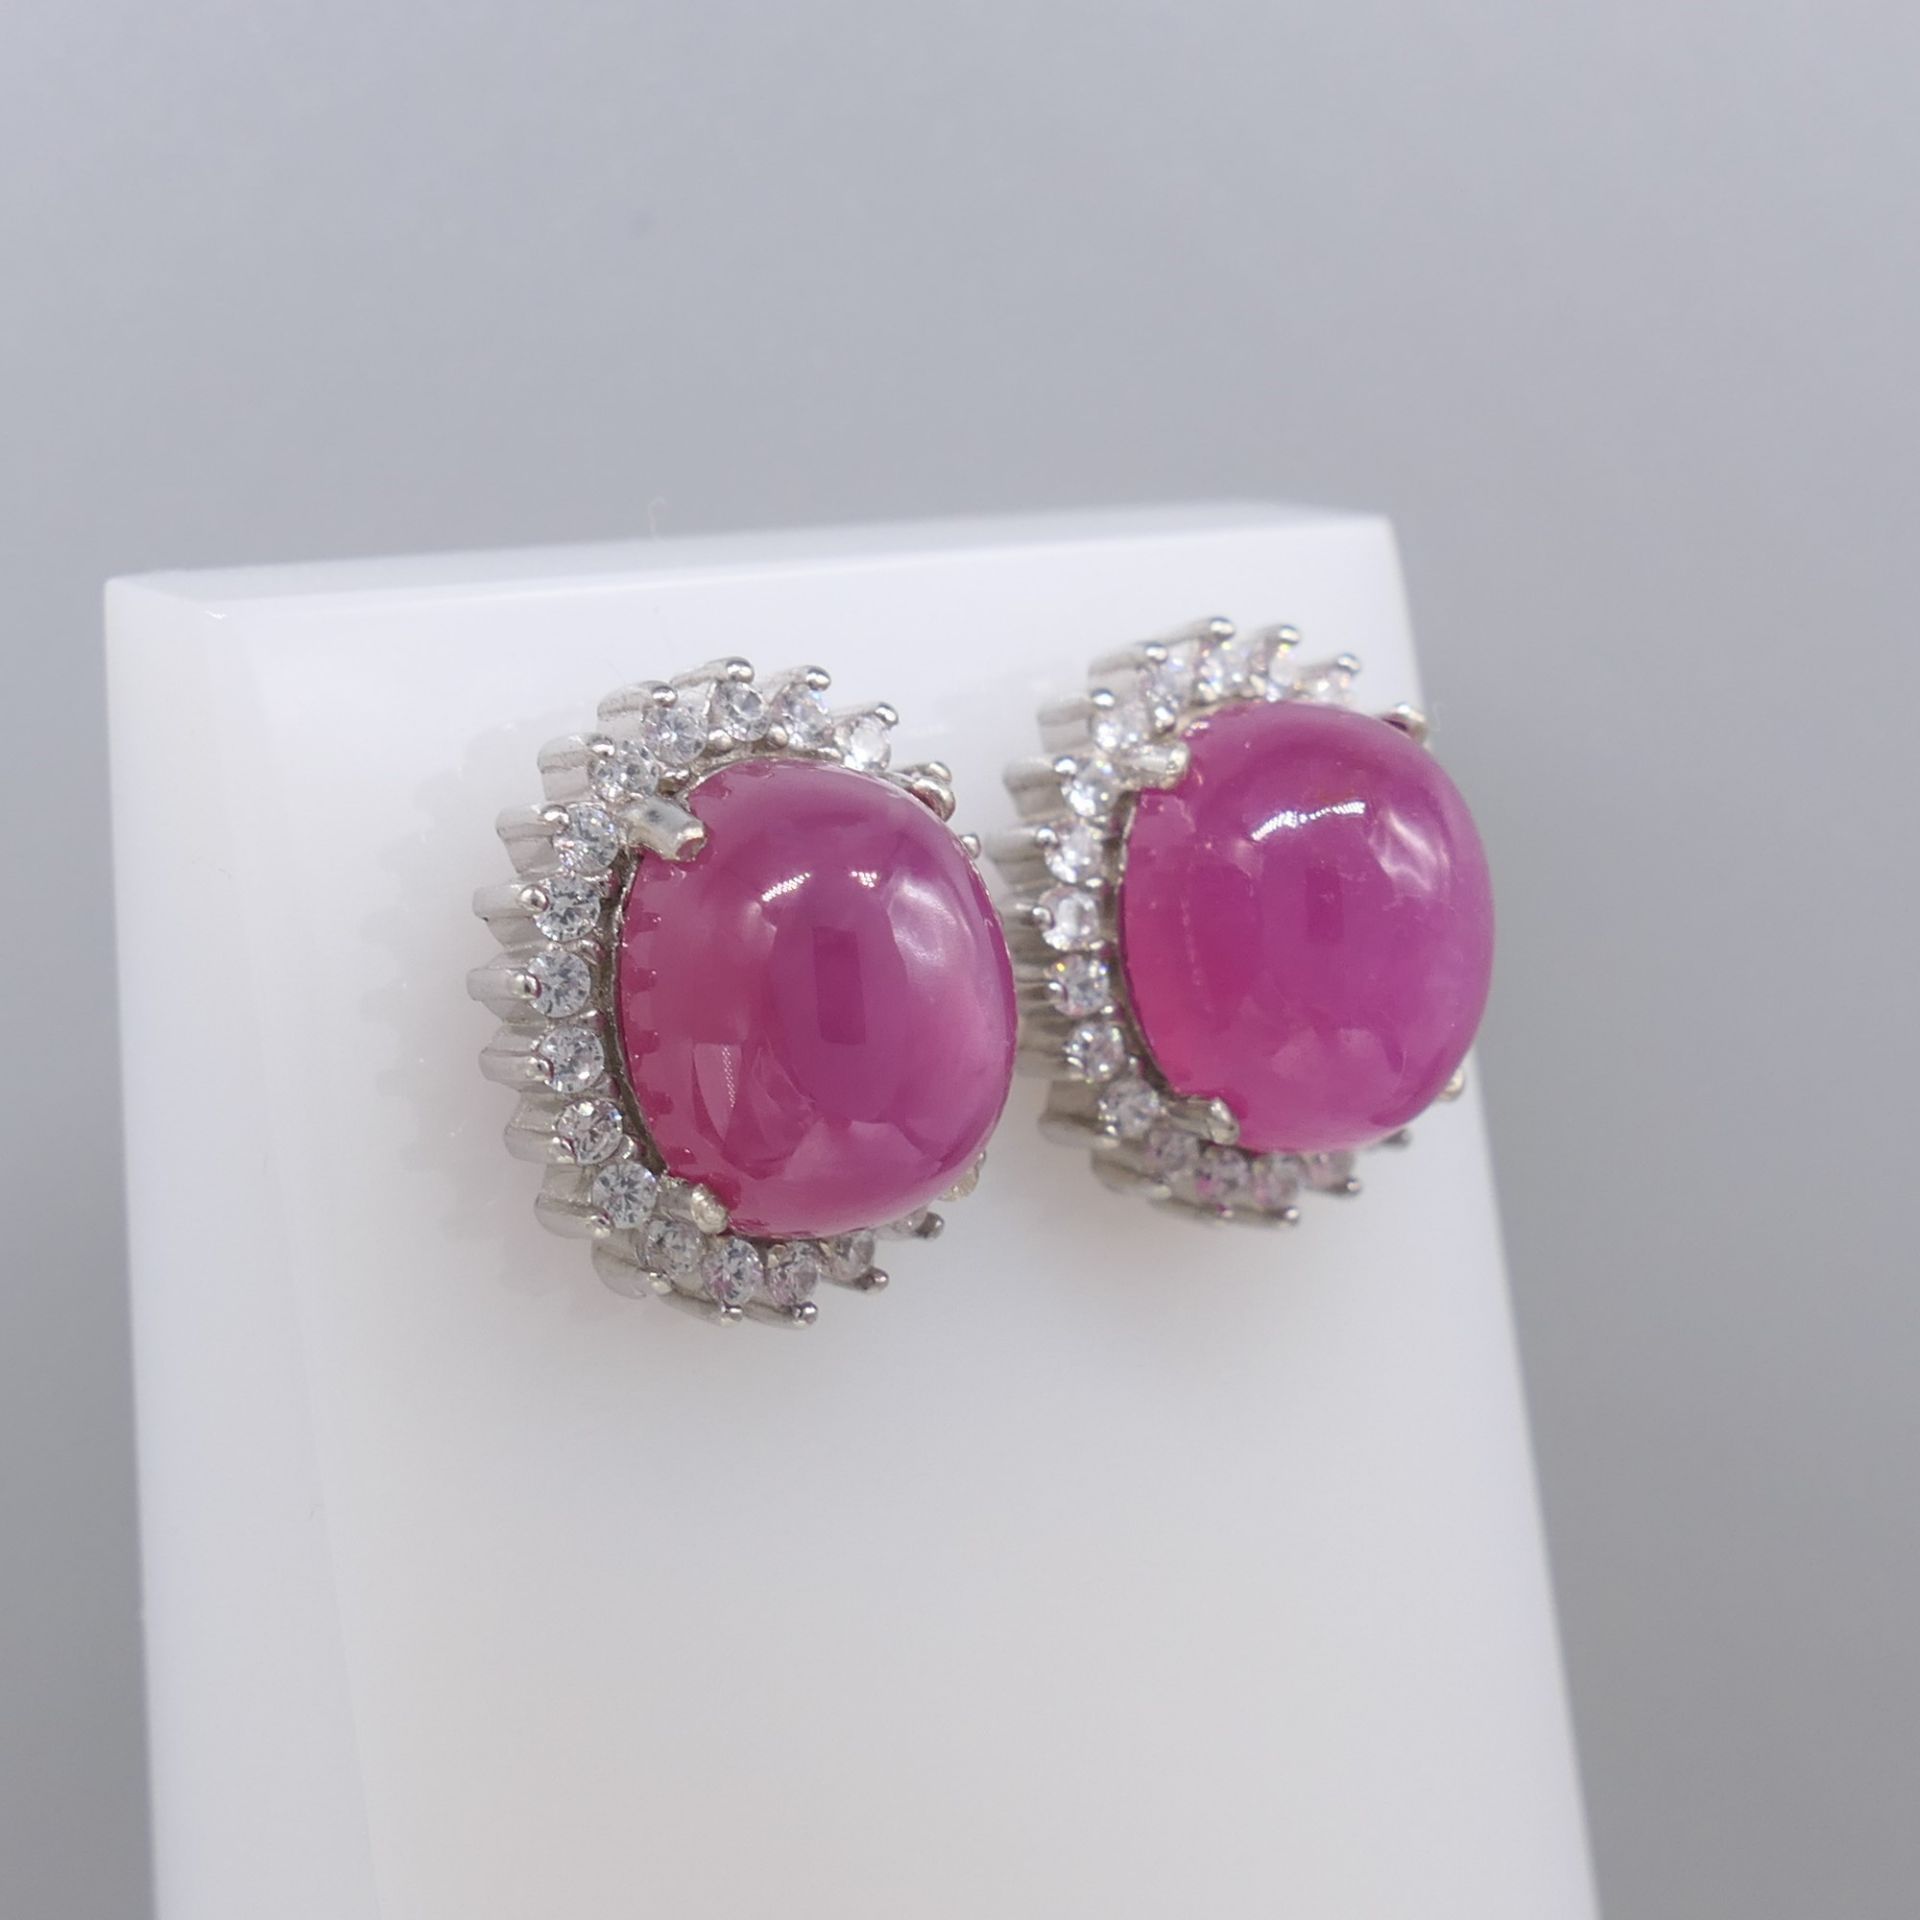 Cabochon Ruby Ear Studs In Sterling Silver, Boxed - Image 3 of 7